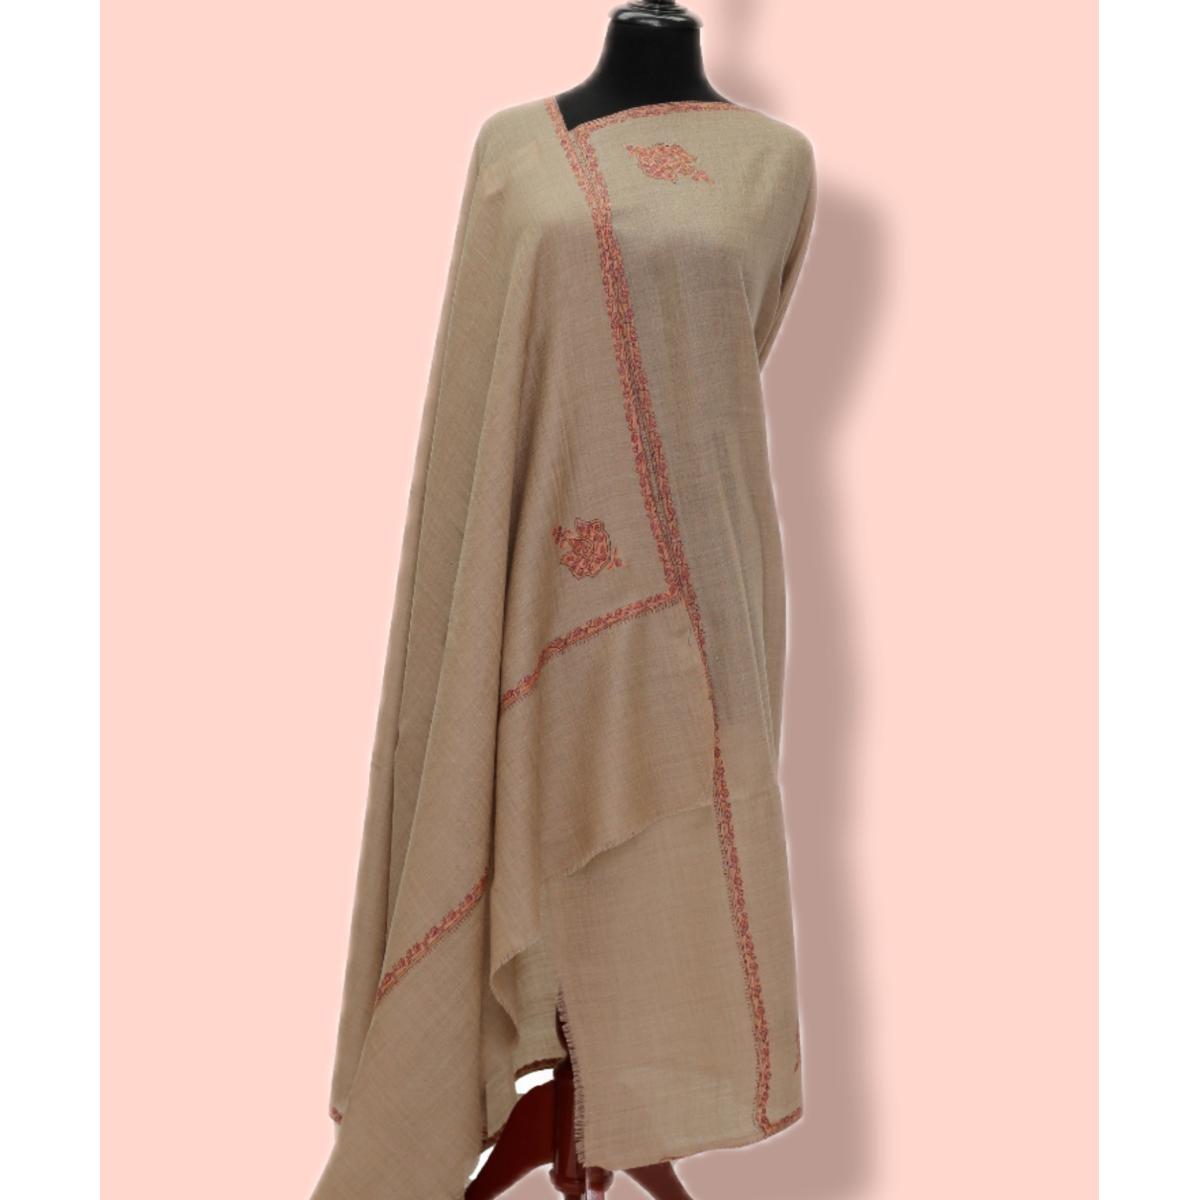 Lv Pashmina Stole Best Price In Pakistan, Rs 2200